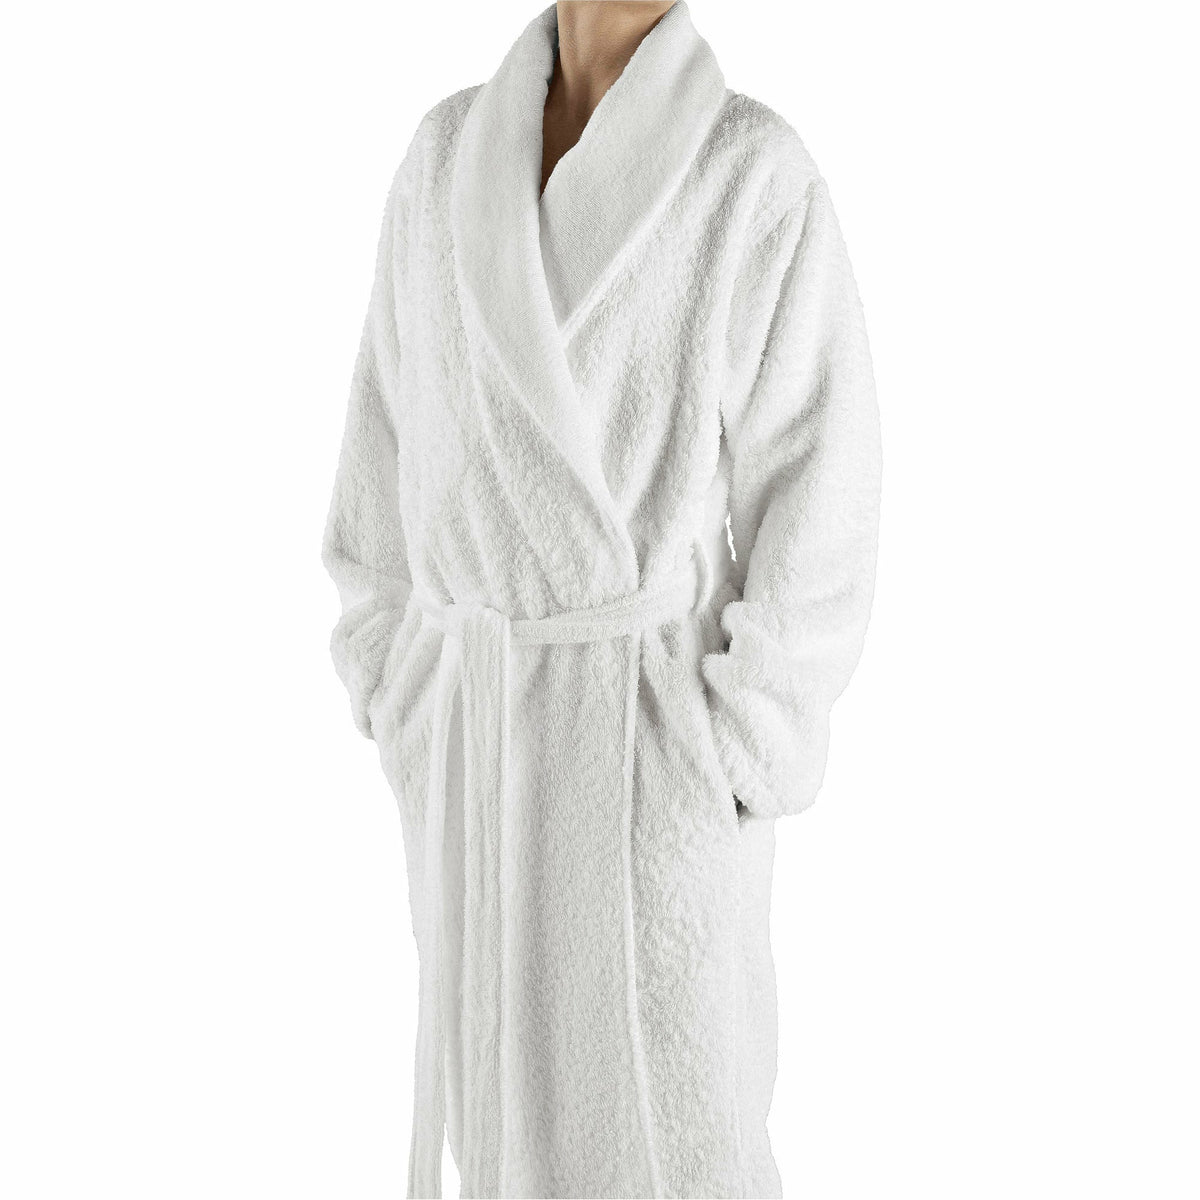 Abyss Super Pile Bath Robes Whole Body White Fine Linens